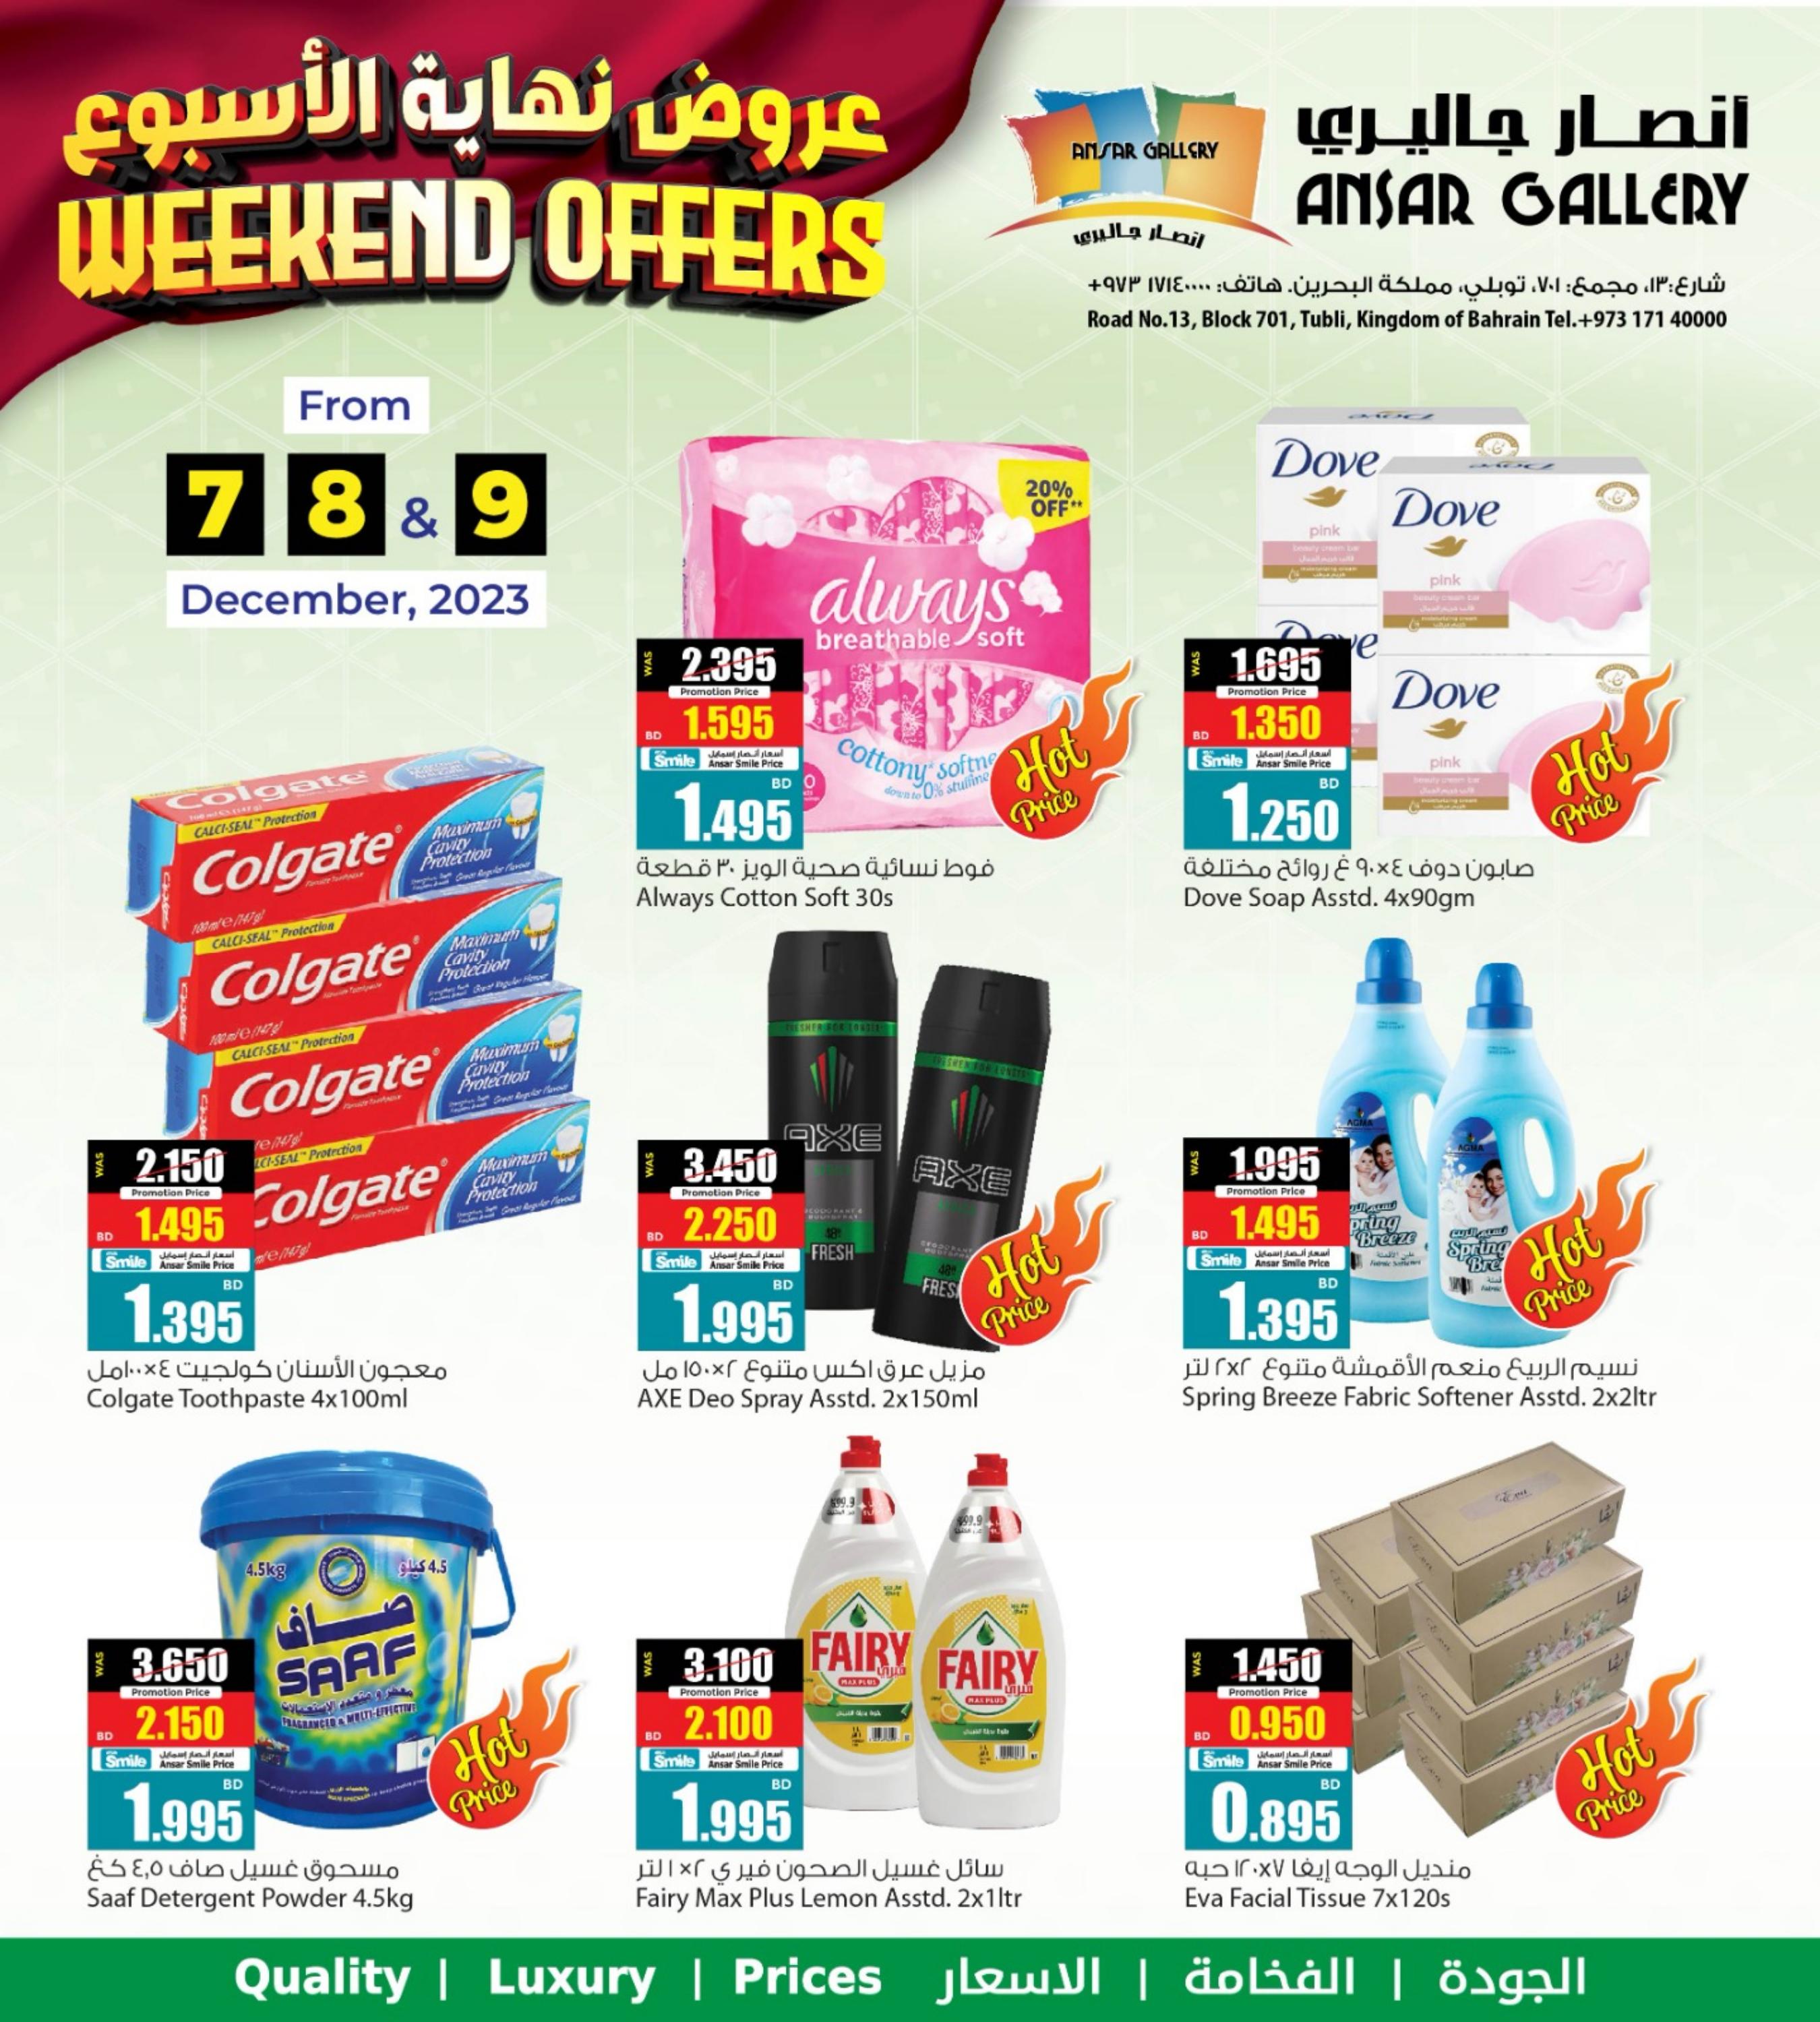 Page 3 at Weekend offers at Ansar Gallery Bahrain